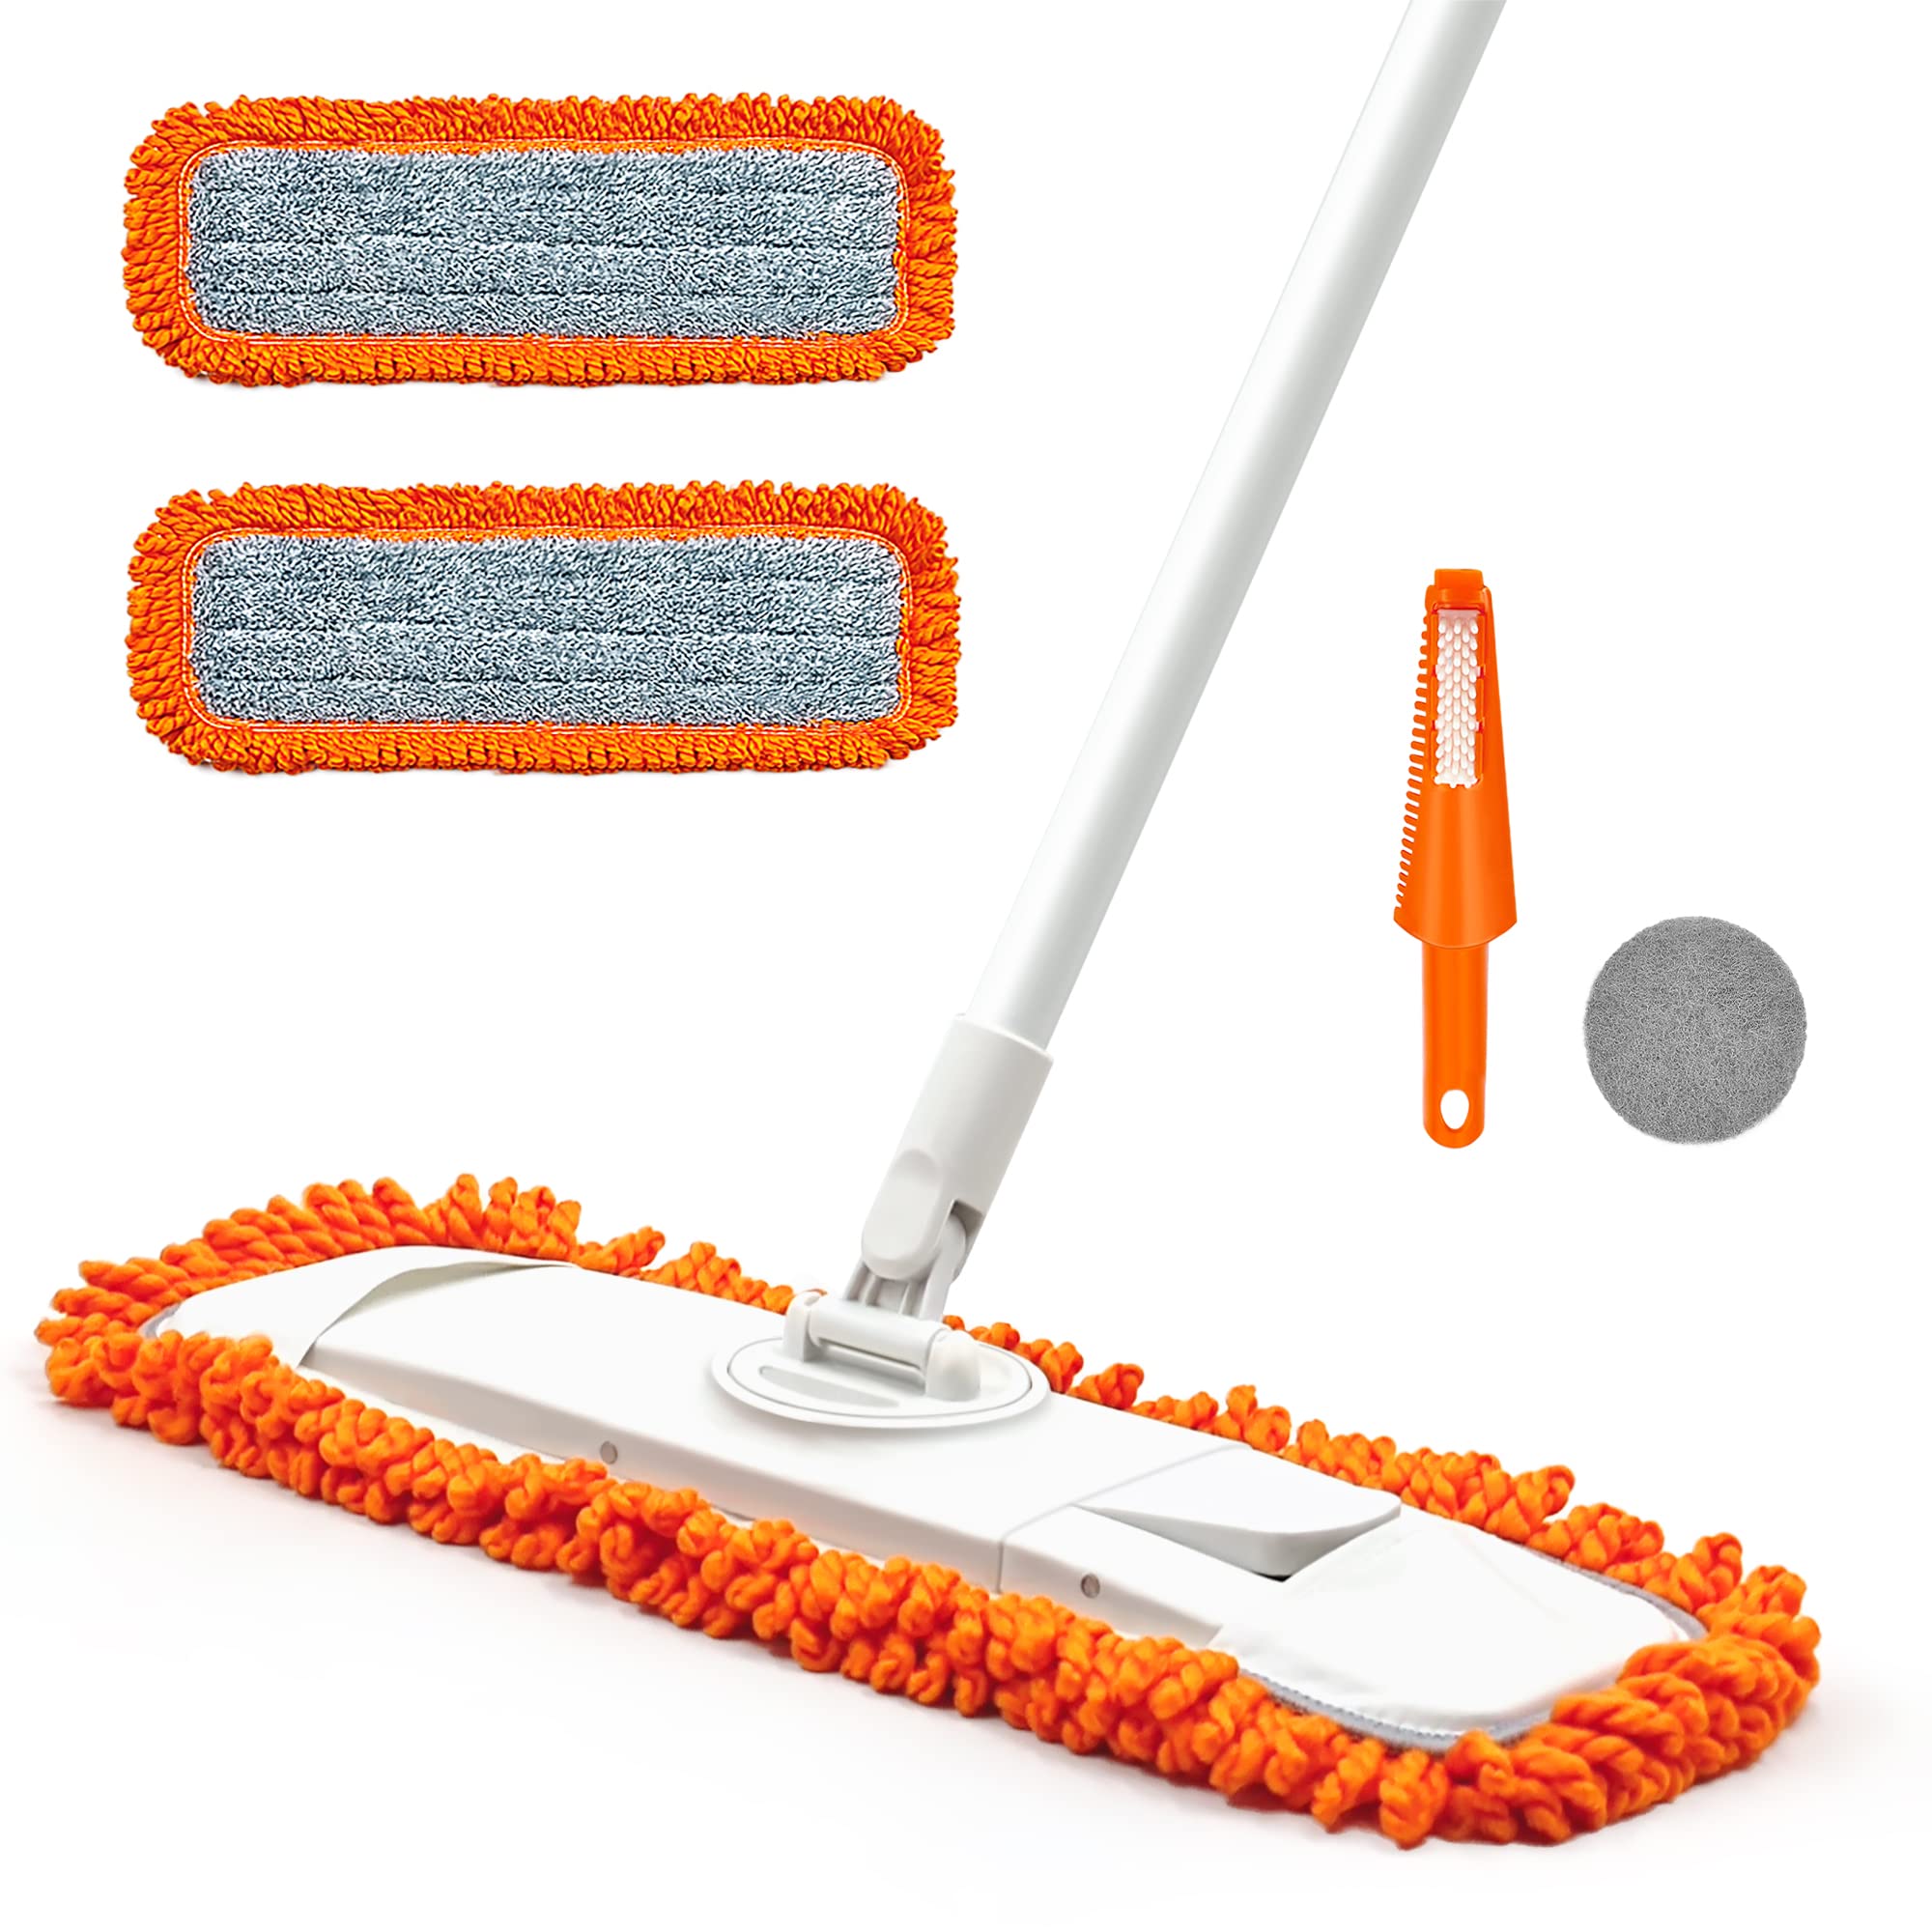 Multi-Purpose Microfiber Flat Mop with Easy Refill for Dry & Wet Floor  Cleaning Mop